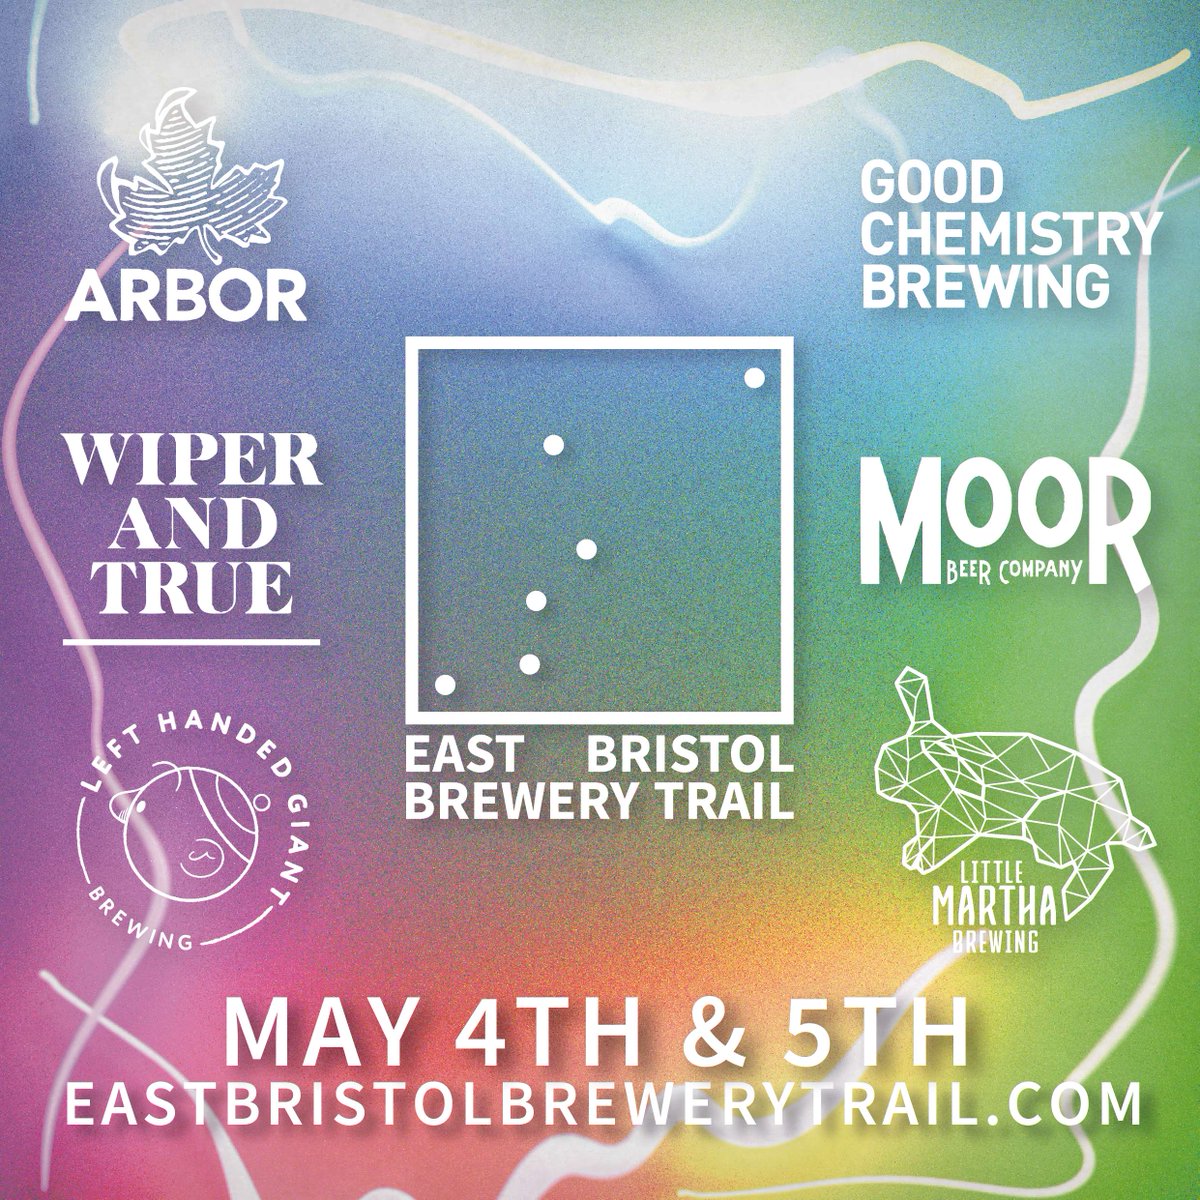 ONE MONTH TO GO 🍺 EAST BRISTOL BREWERY TRAIL Its time to get plotting your route. The East Bristol Brewery trail is only one month away. Visit @ArborAles, @GoodChemBrew, @DrinkMoorBeer, @LilMarthaBrew, @LHGBrewingCo along the way… and @WiperandTrueTap of course.